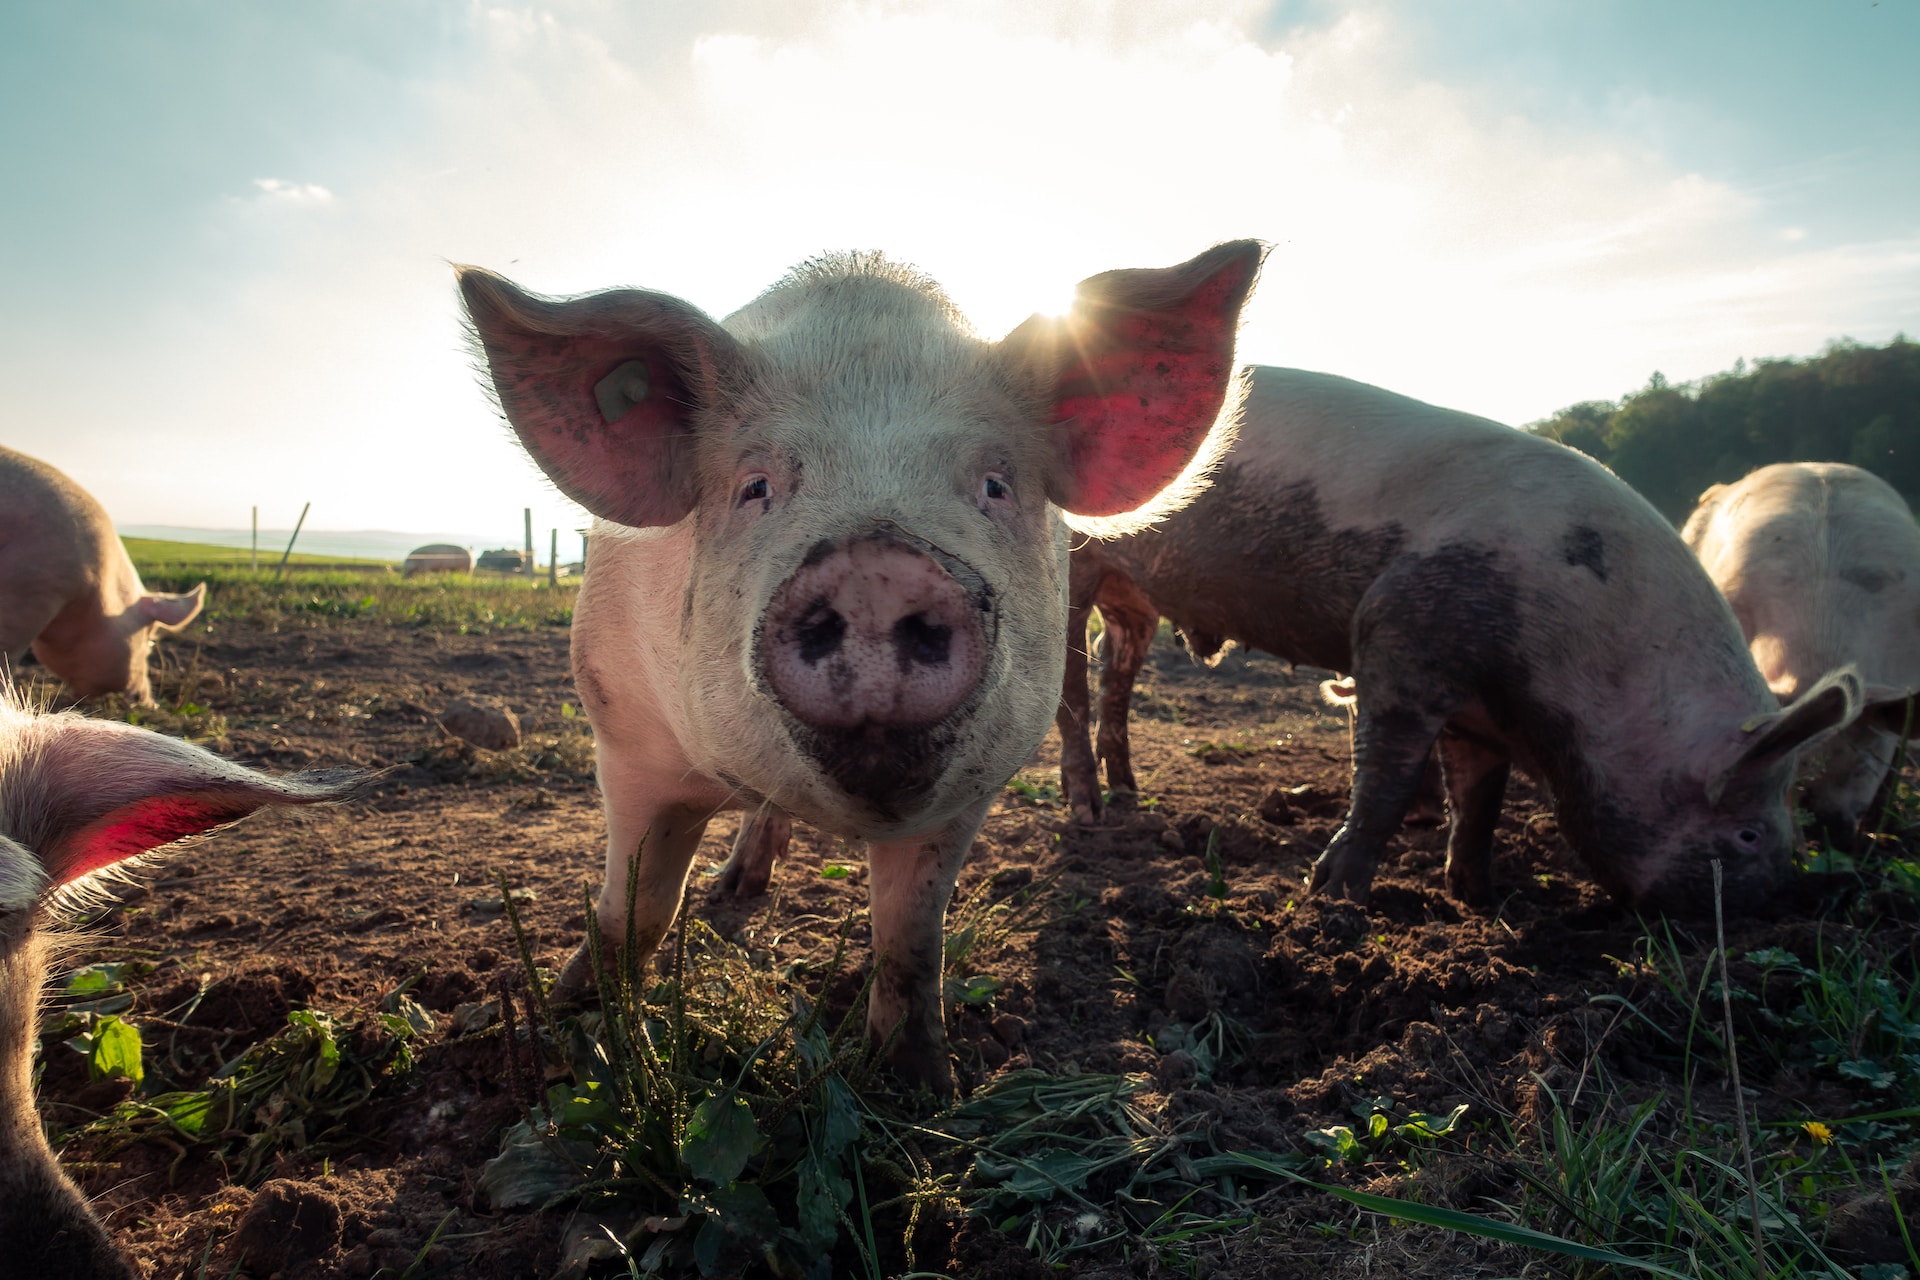 How to stop pork barrelling? Photo by Pascal Debrunner on Unsplash